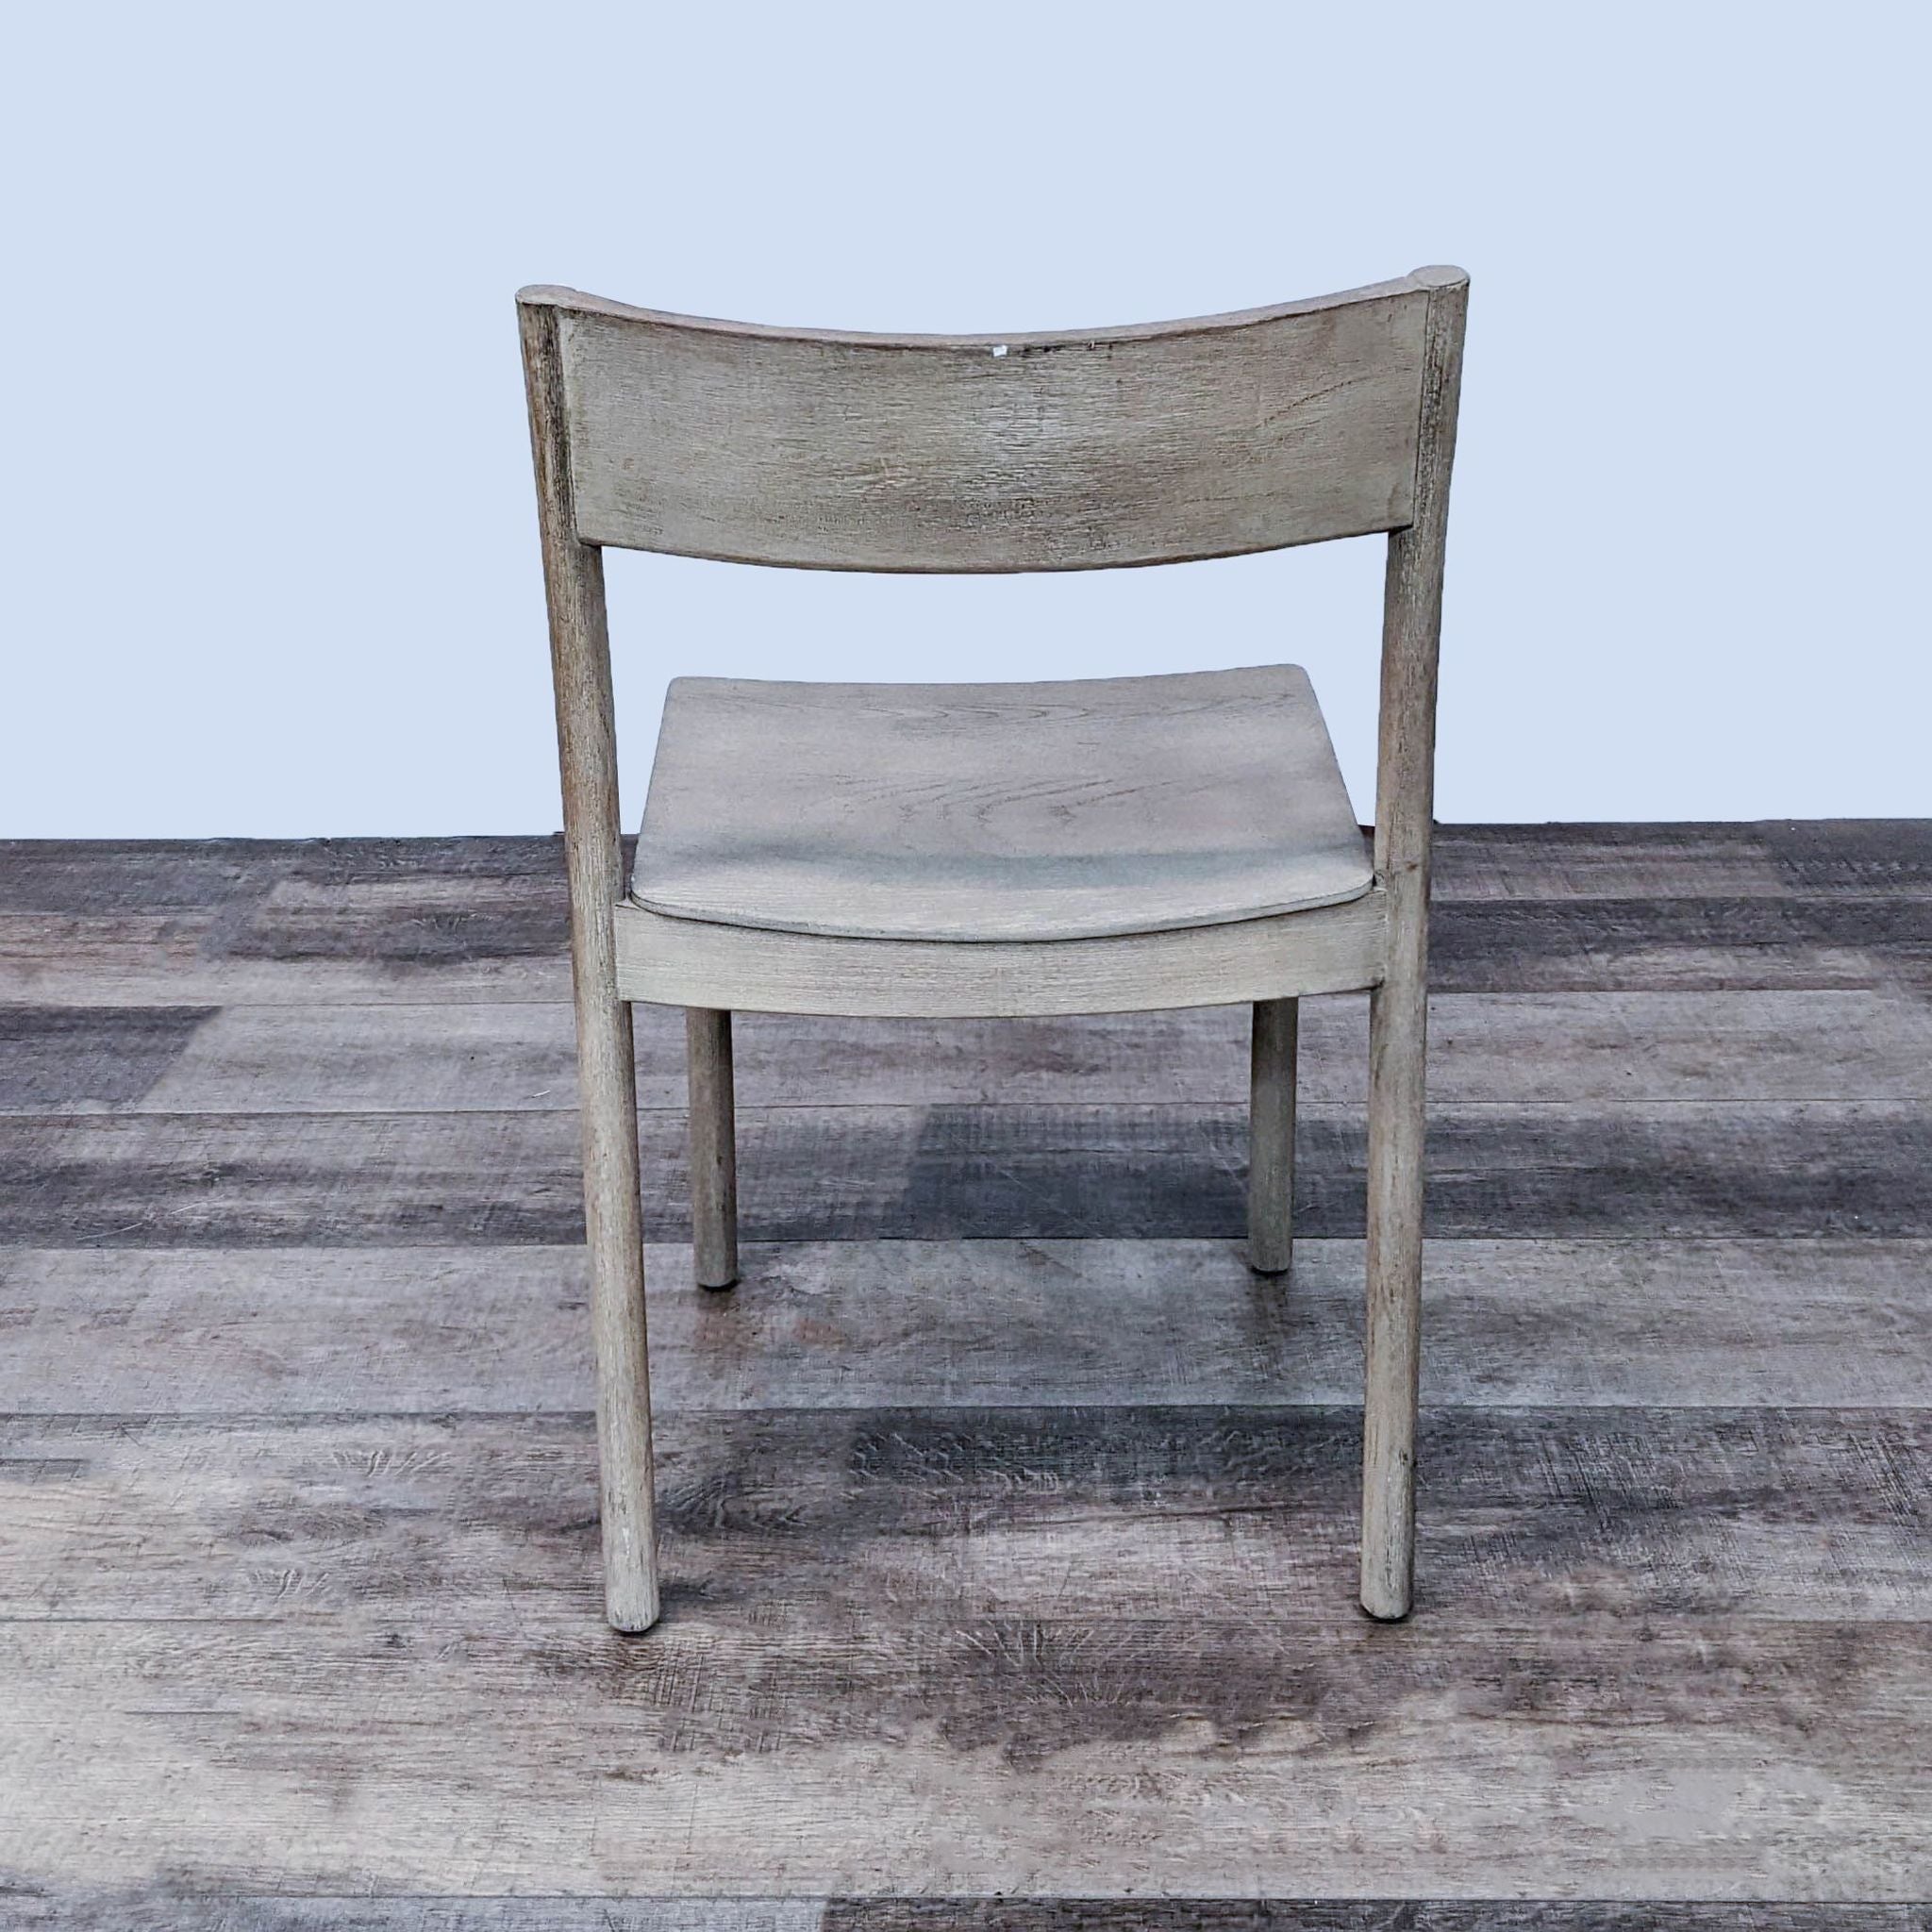 West Elm Berkshire chair with Dune finish on wooden floor.